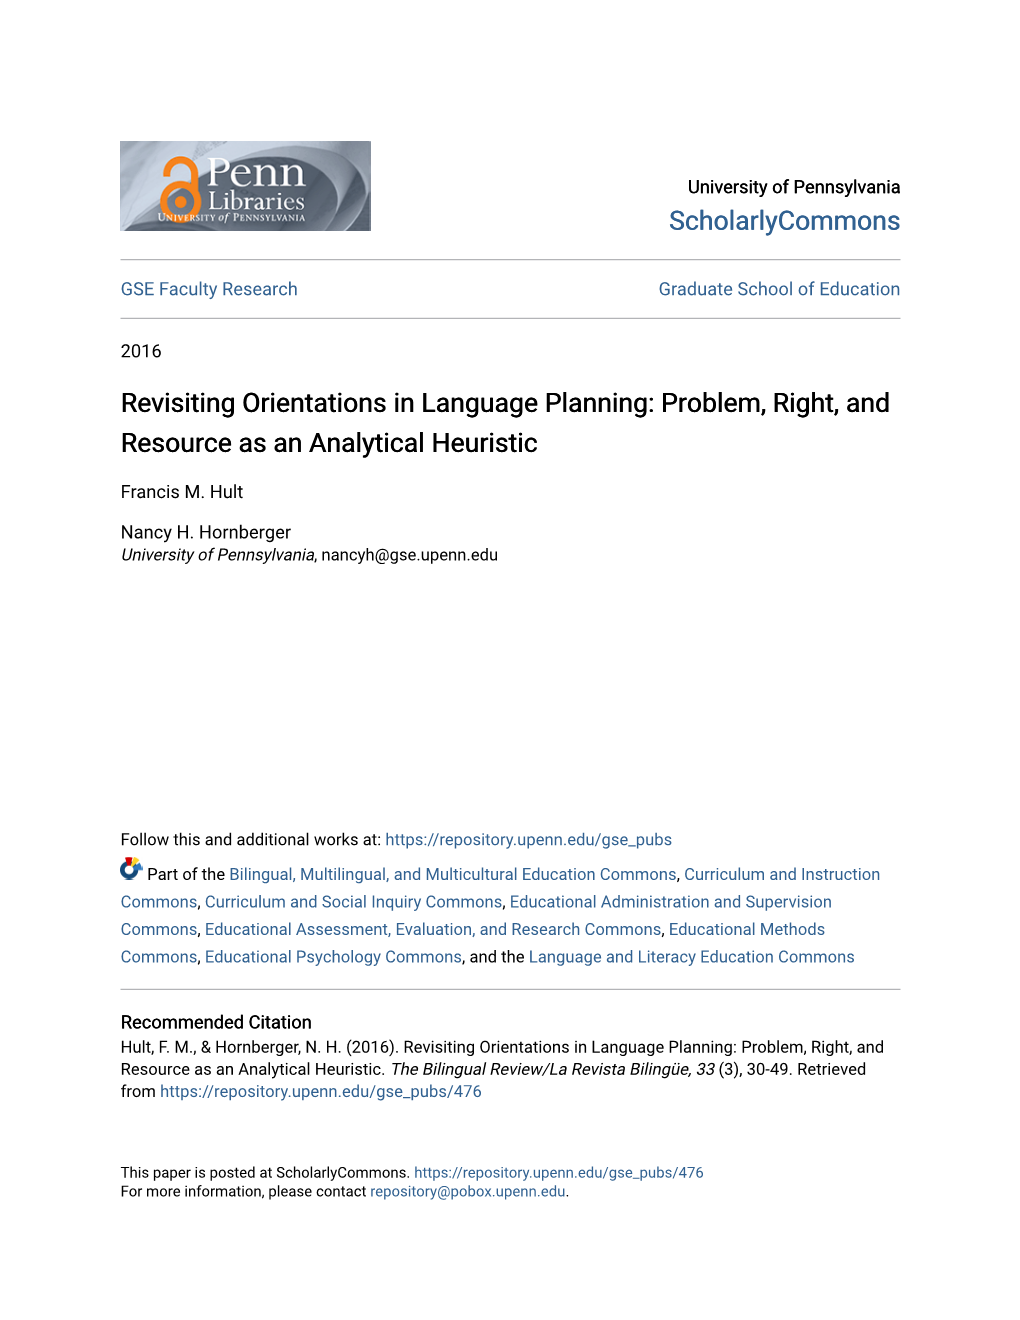 Revisiting Orientations in Language Planning: Problem, Right, and Resource As an Analytical Heuristic